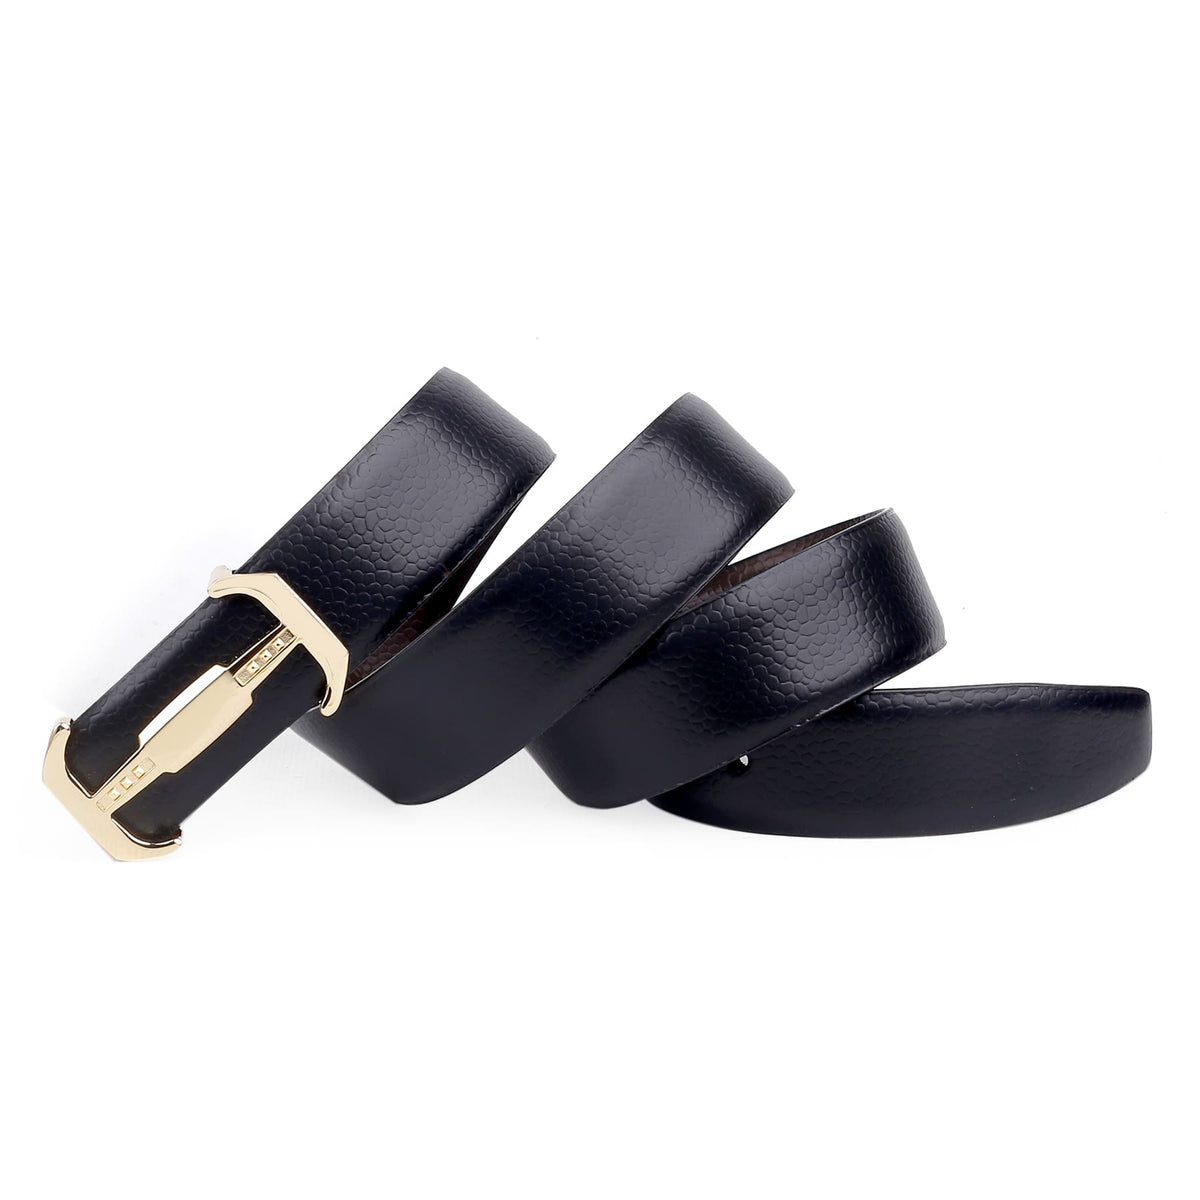 Bacca Bucci Premium Leather Formal Dress Belts with a Stylish Finish and a Nickel Free Buckle